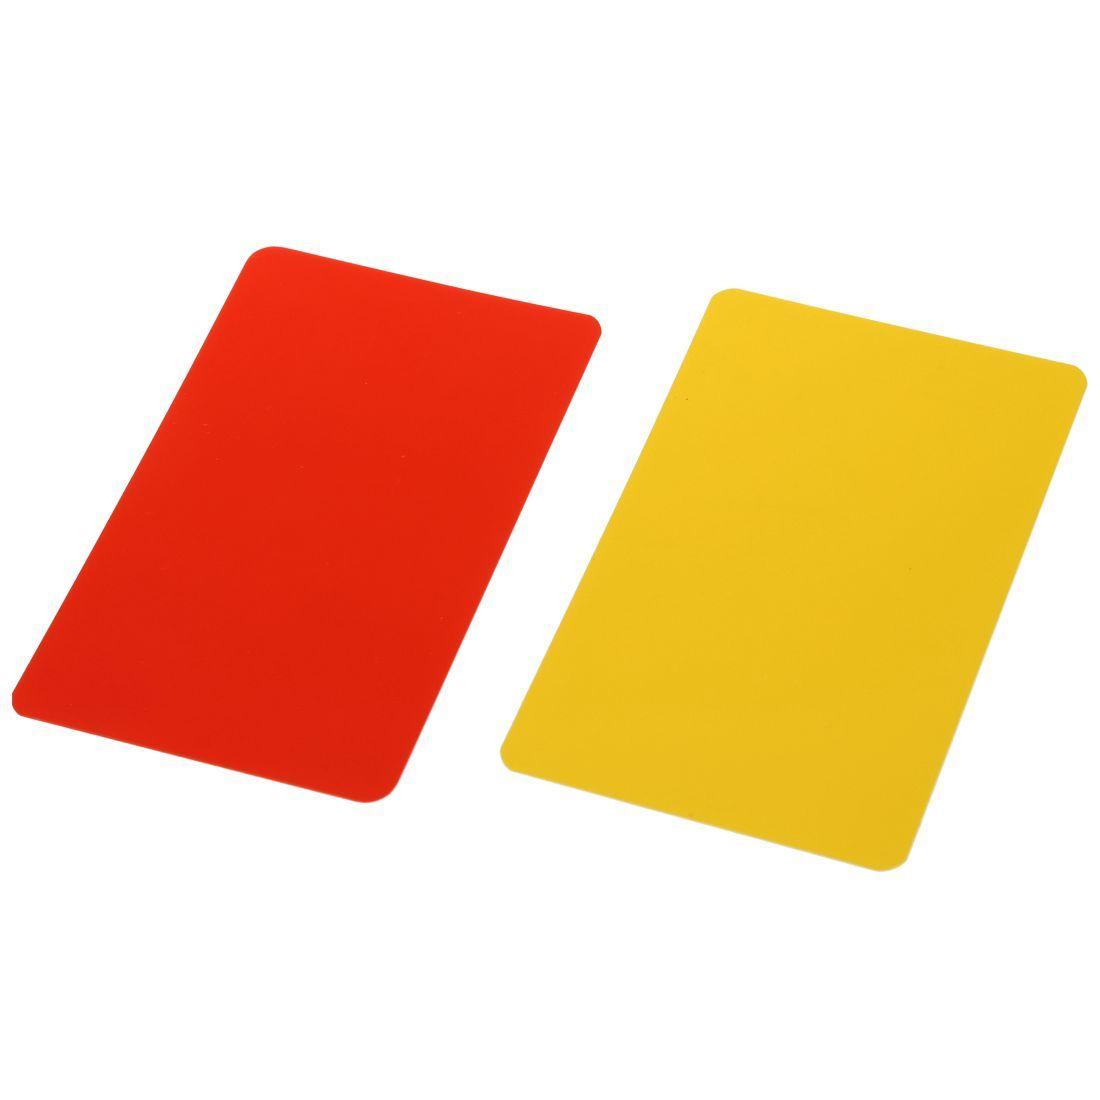 Red and Yellow Match Logo - Box for football match referee red and yellow cards R3F4 ...